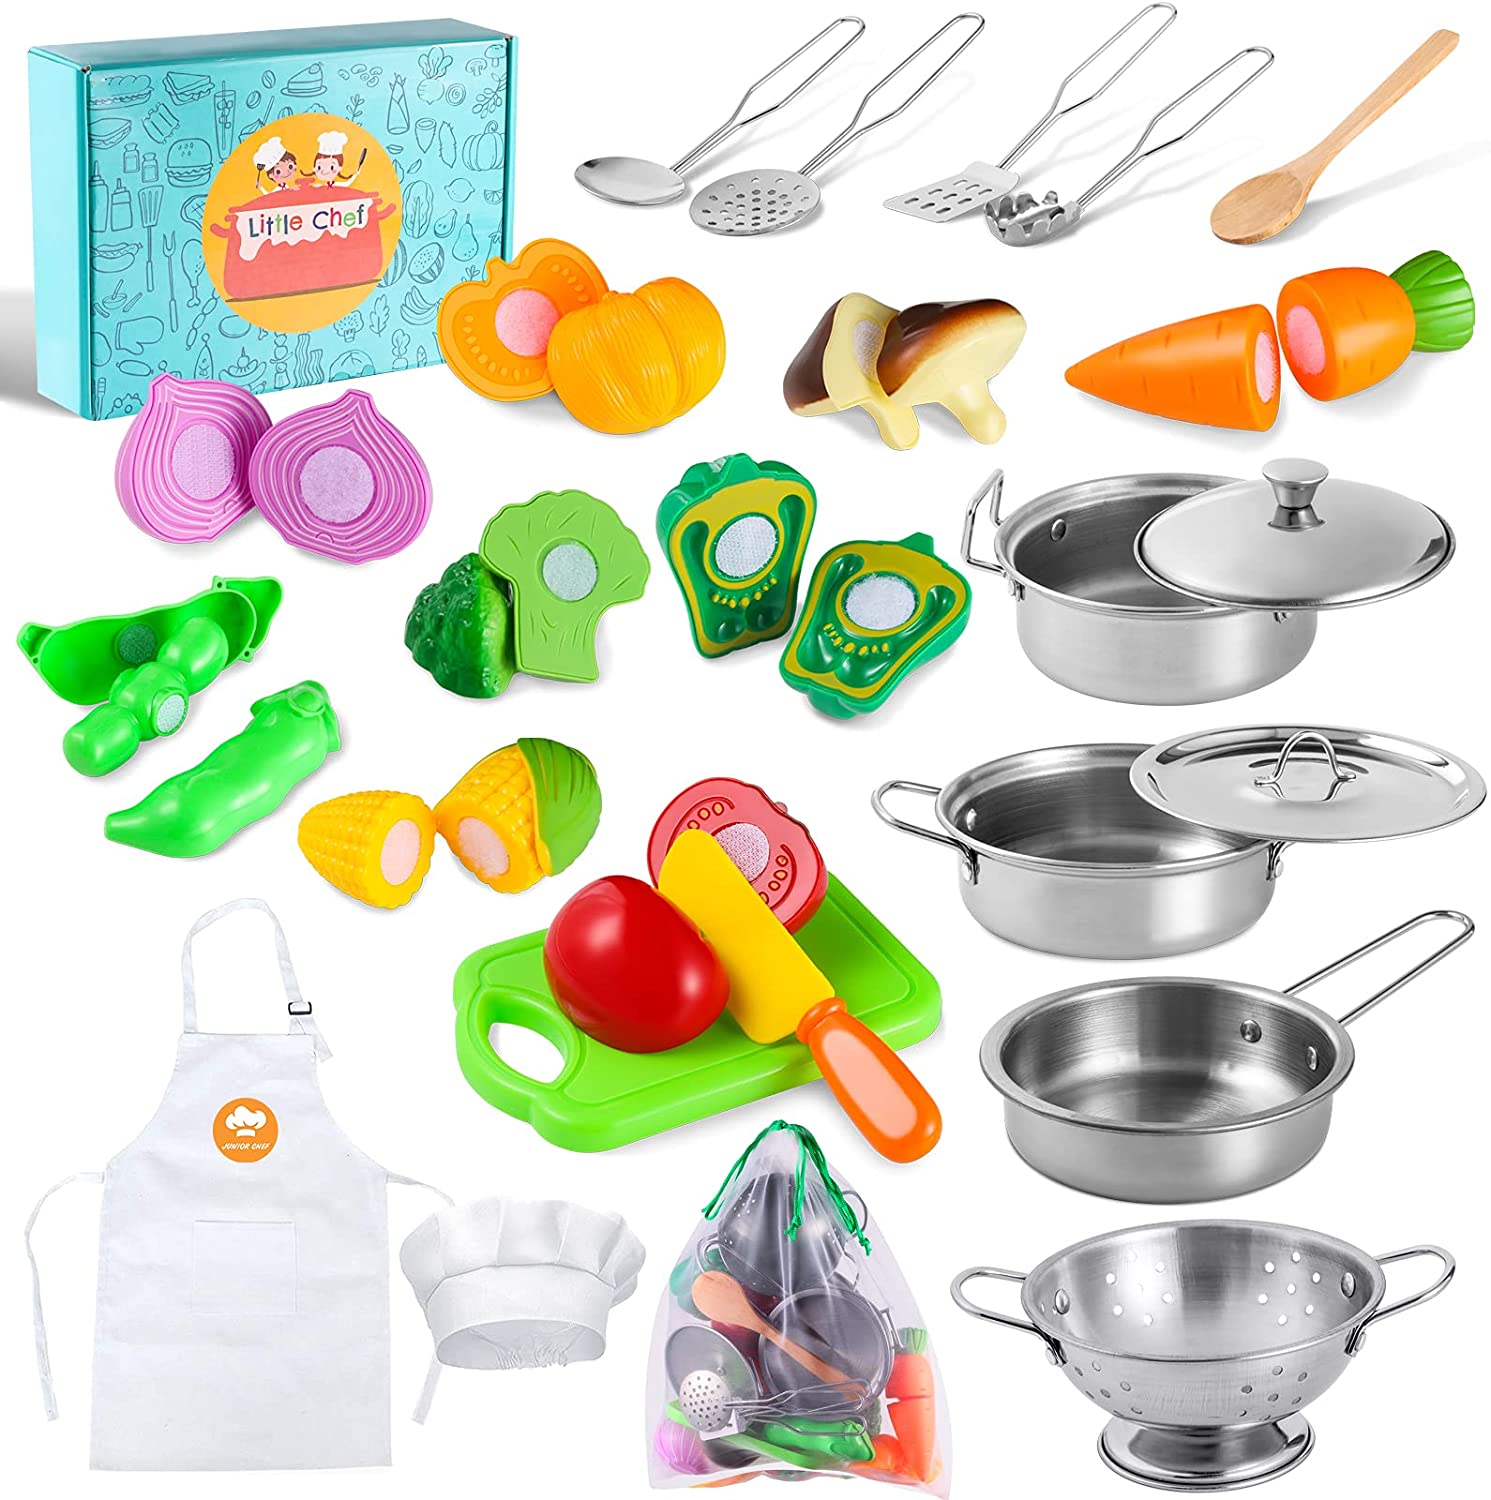 Cutting Vegetables for Kids Girls Apron & Chef Hat Juboury Kitchen Pretend Play Toys with Stainless Steel Cookware Pots and Pans Set Boys Toddlers Cooking Utensils 